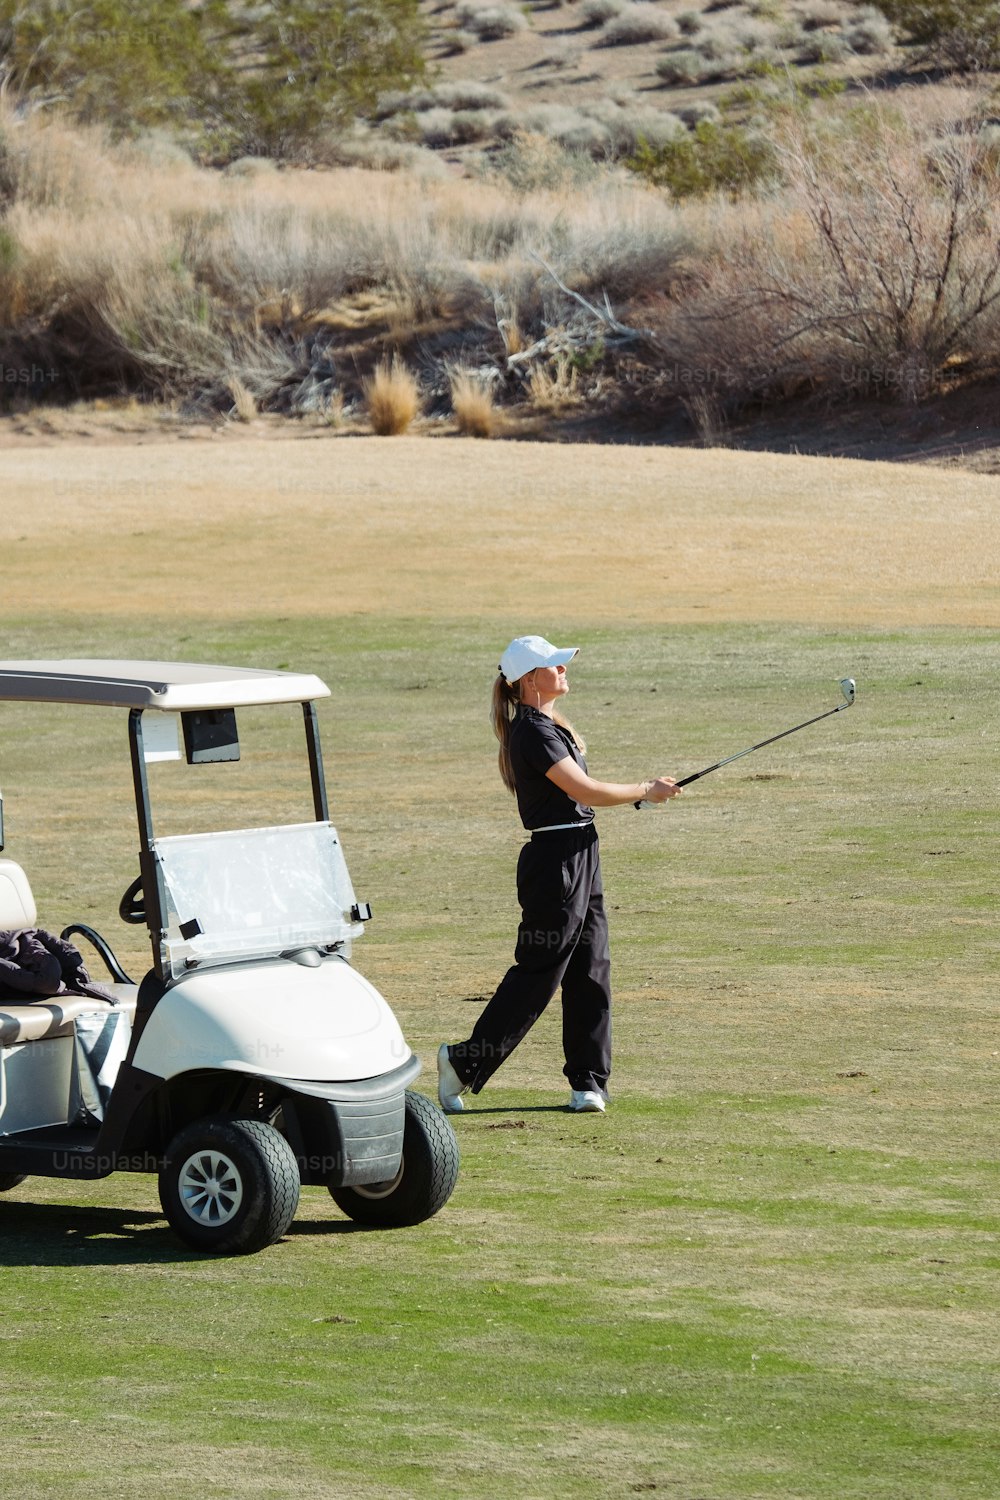 a woman playing golf on a golf course